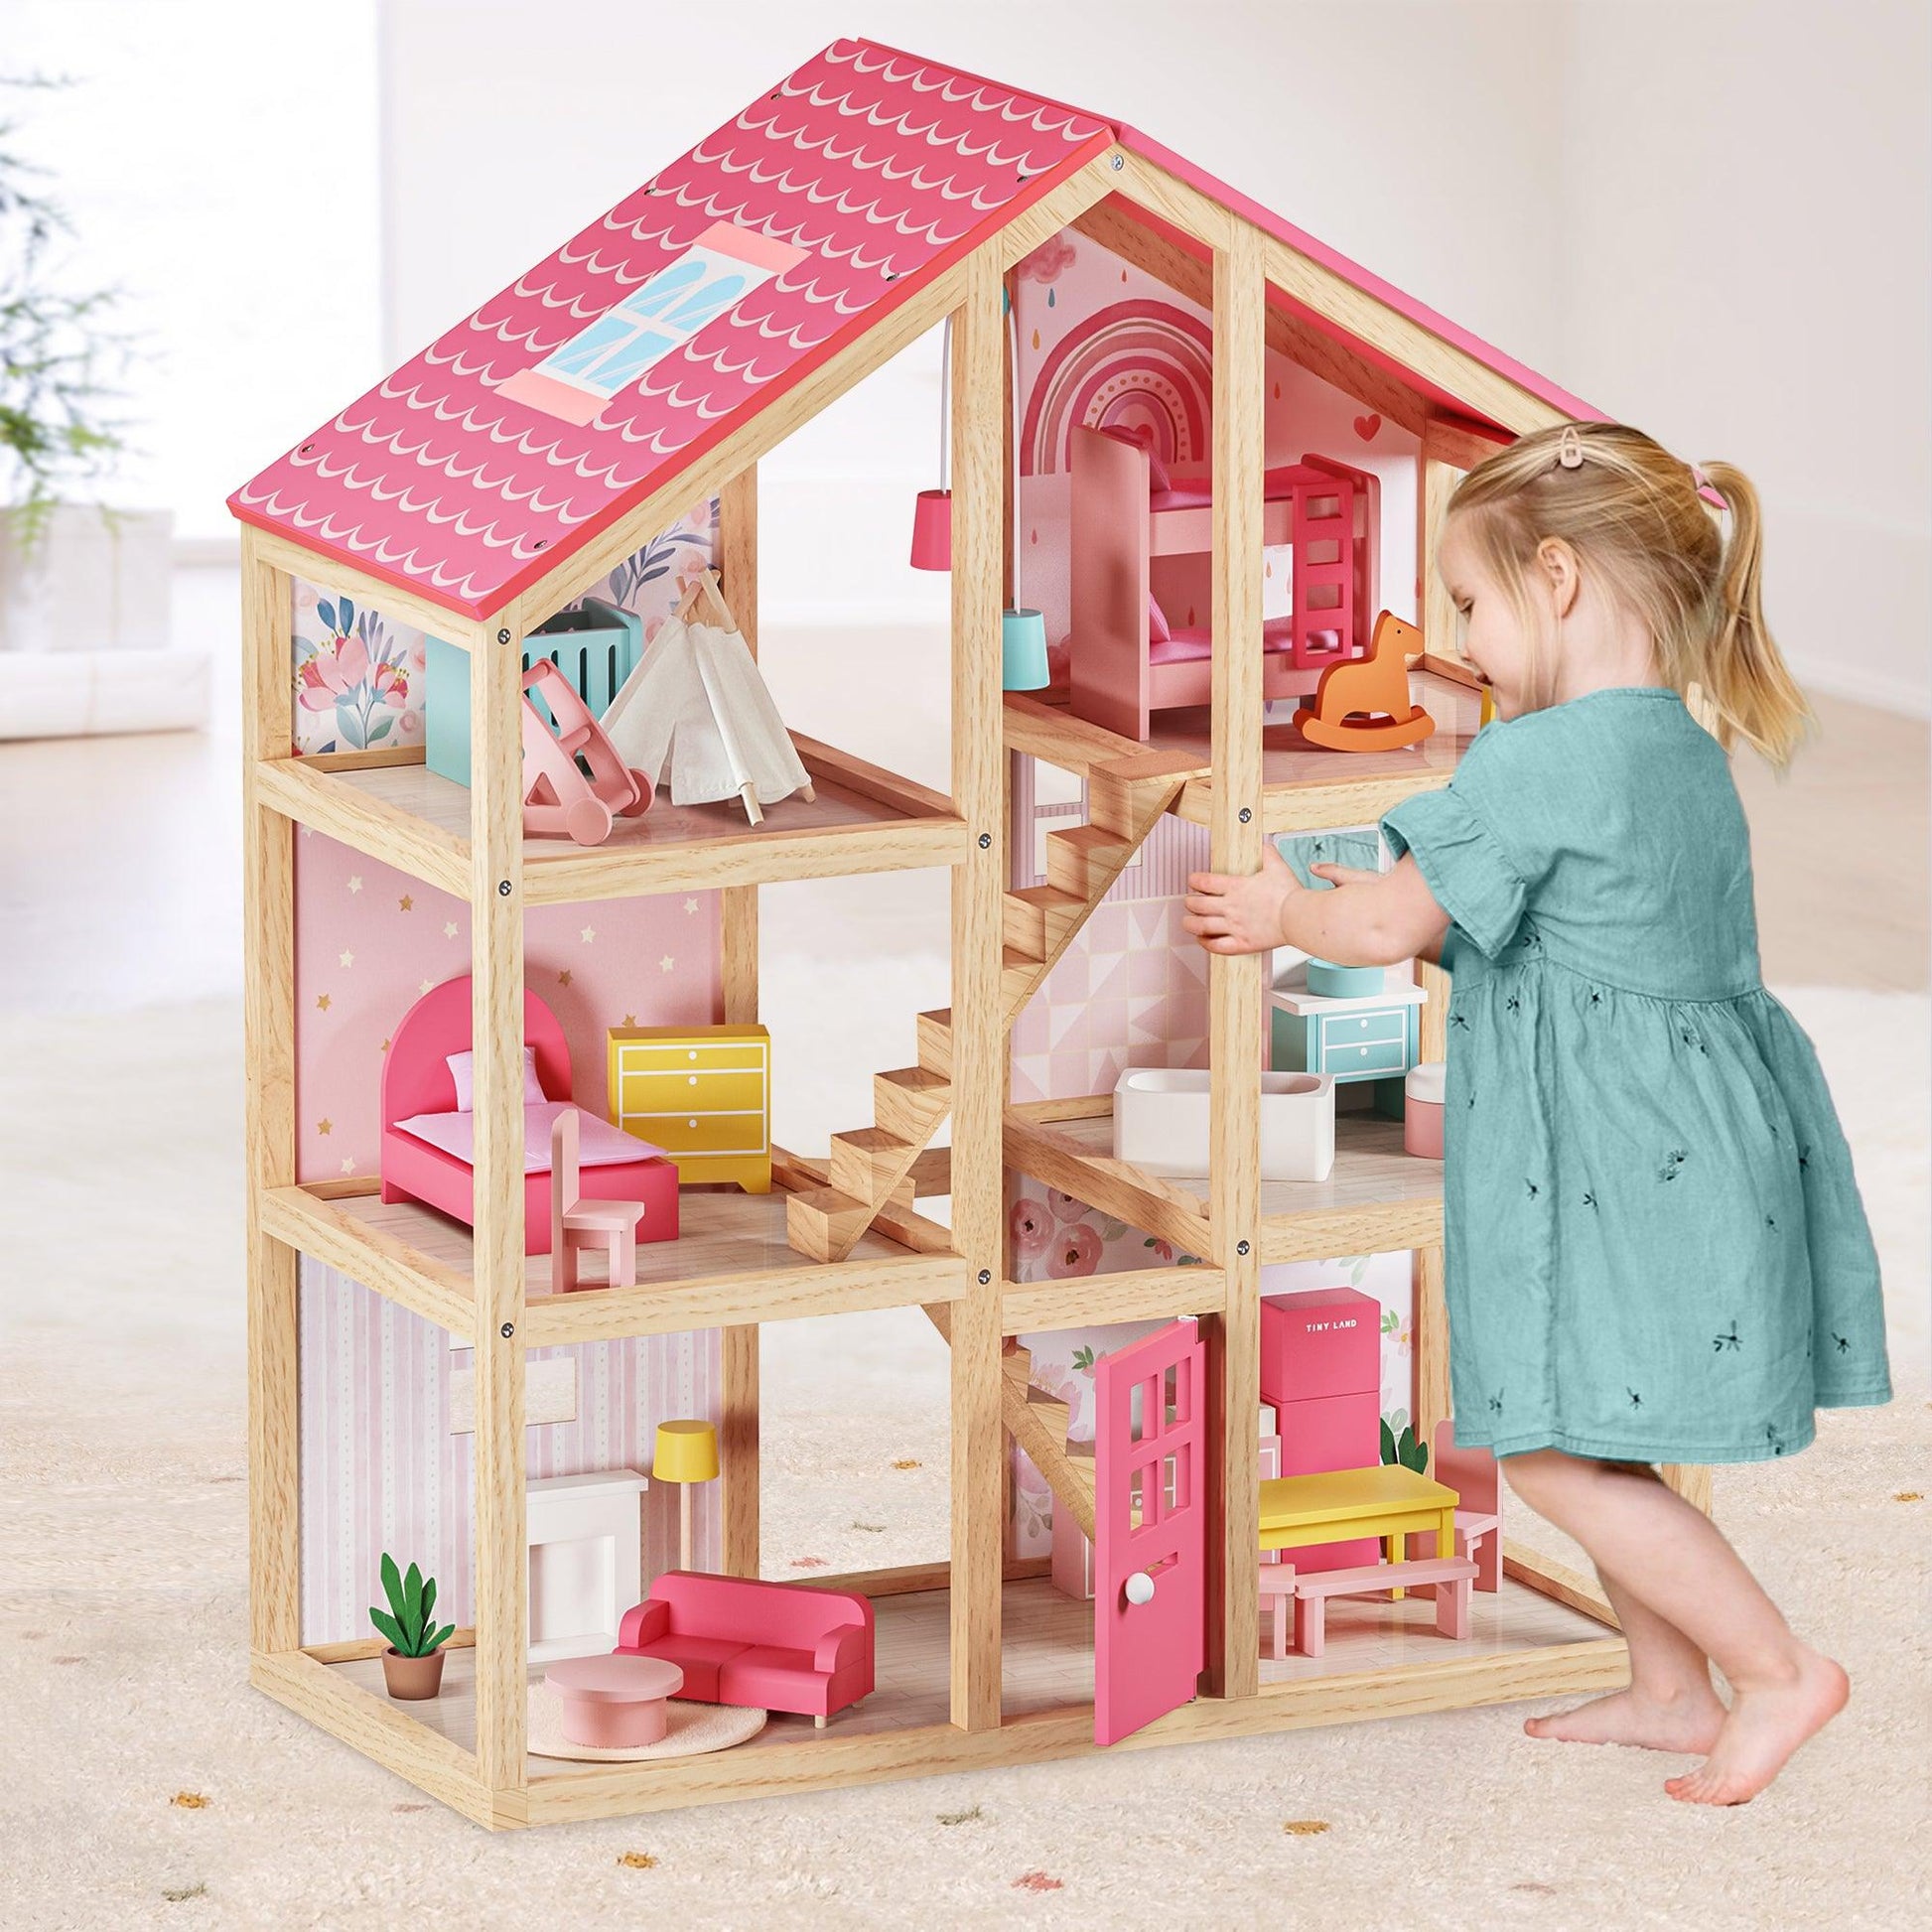 Tiny Land® Love Dollhouse with 30 Furniture, Tiny Land Offical Store®